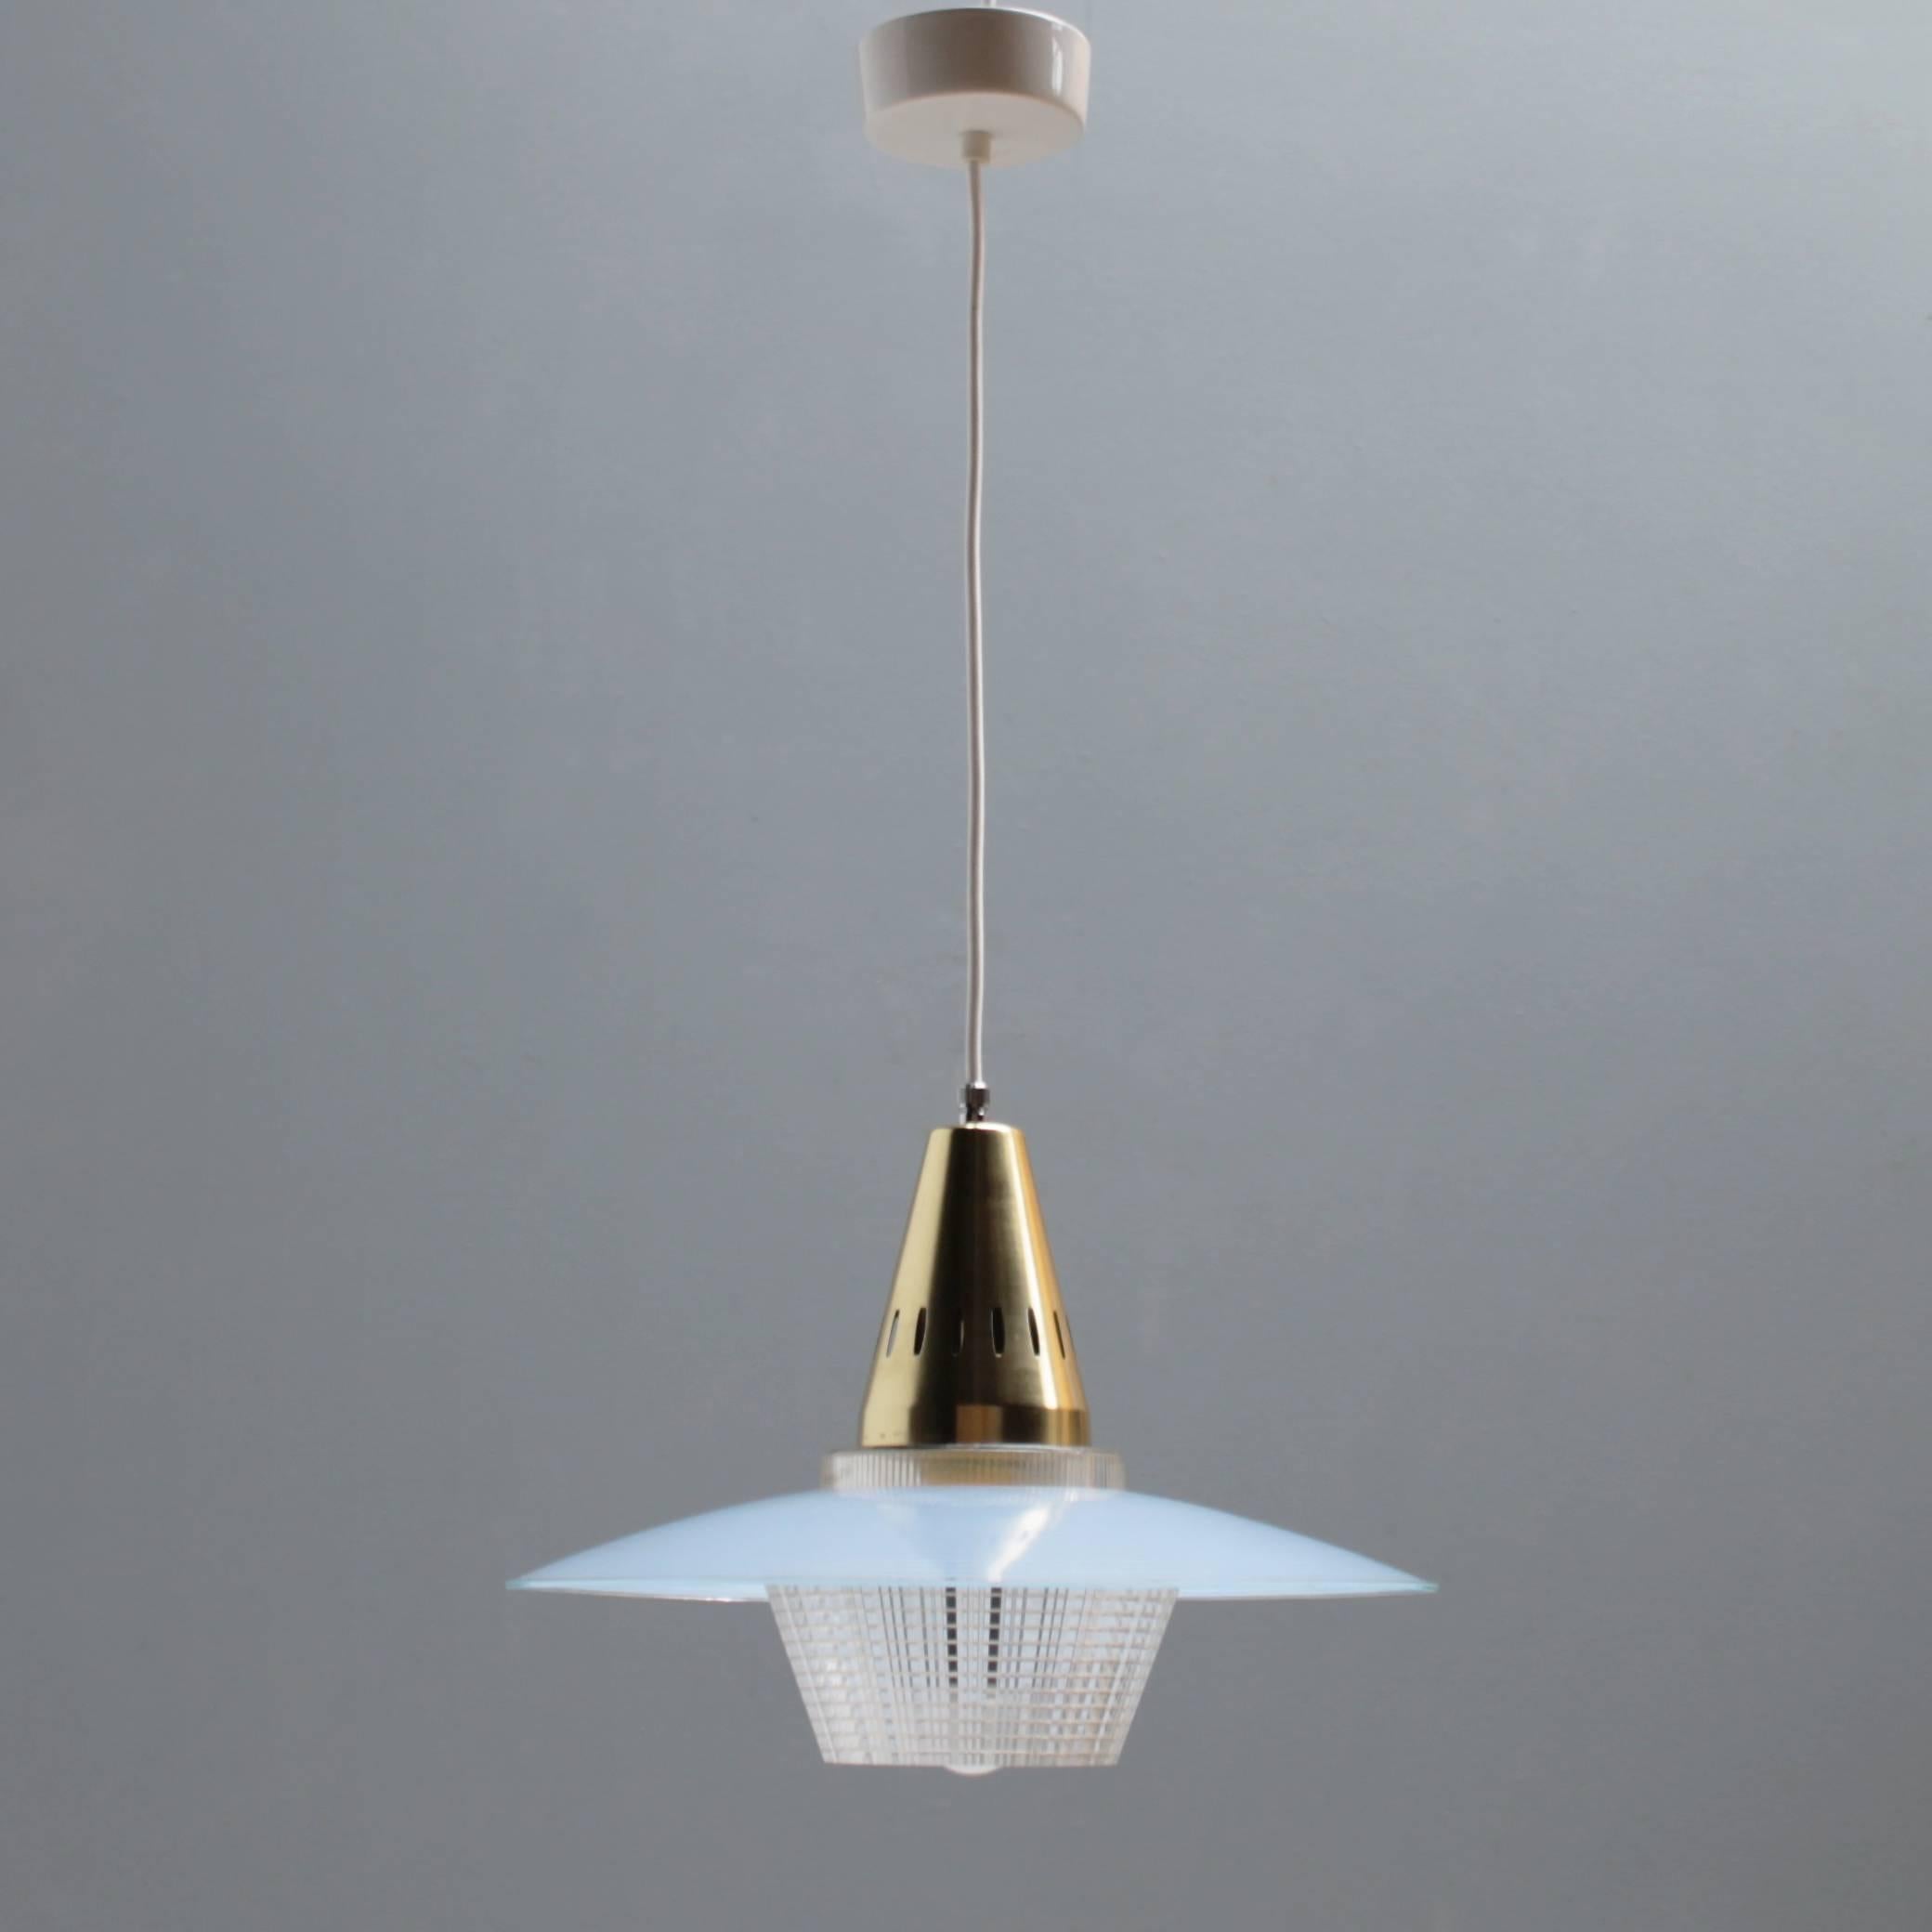 Charming pendant in manner of Stilnovo. Austria or Italian but the design is unknown to me. Blue glass shade with a brass gilt aluminium fixture with a plastic light diffuser. White porcelain canopy.
Dimensions: height 10.2 in. (26 cm), diameter